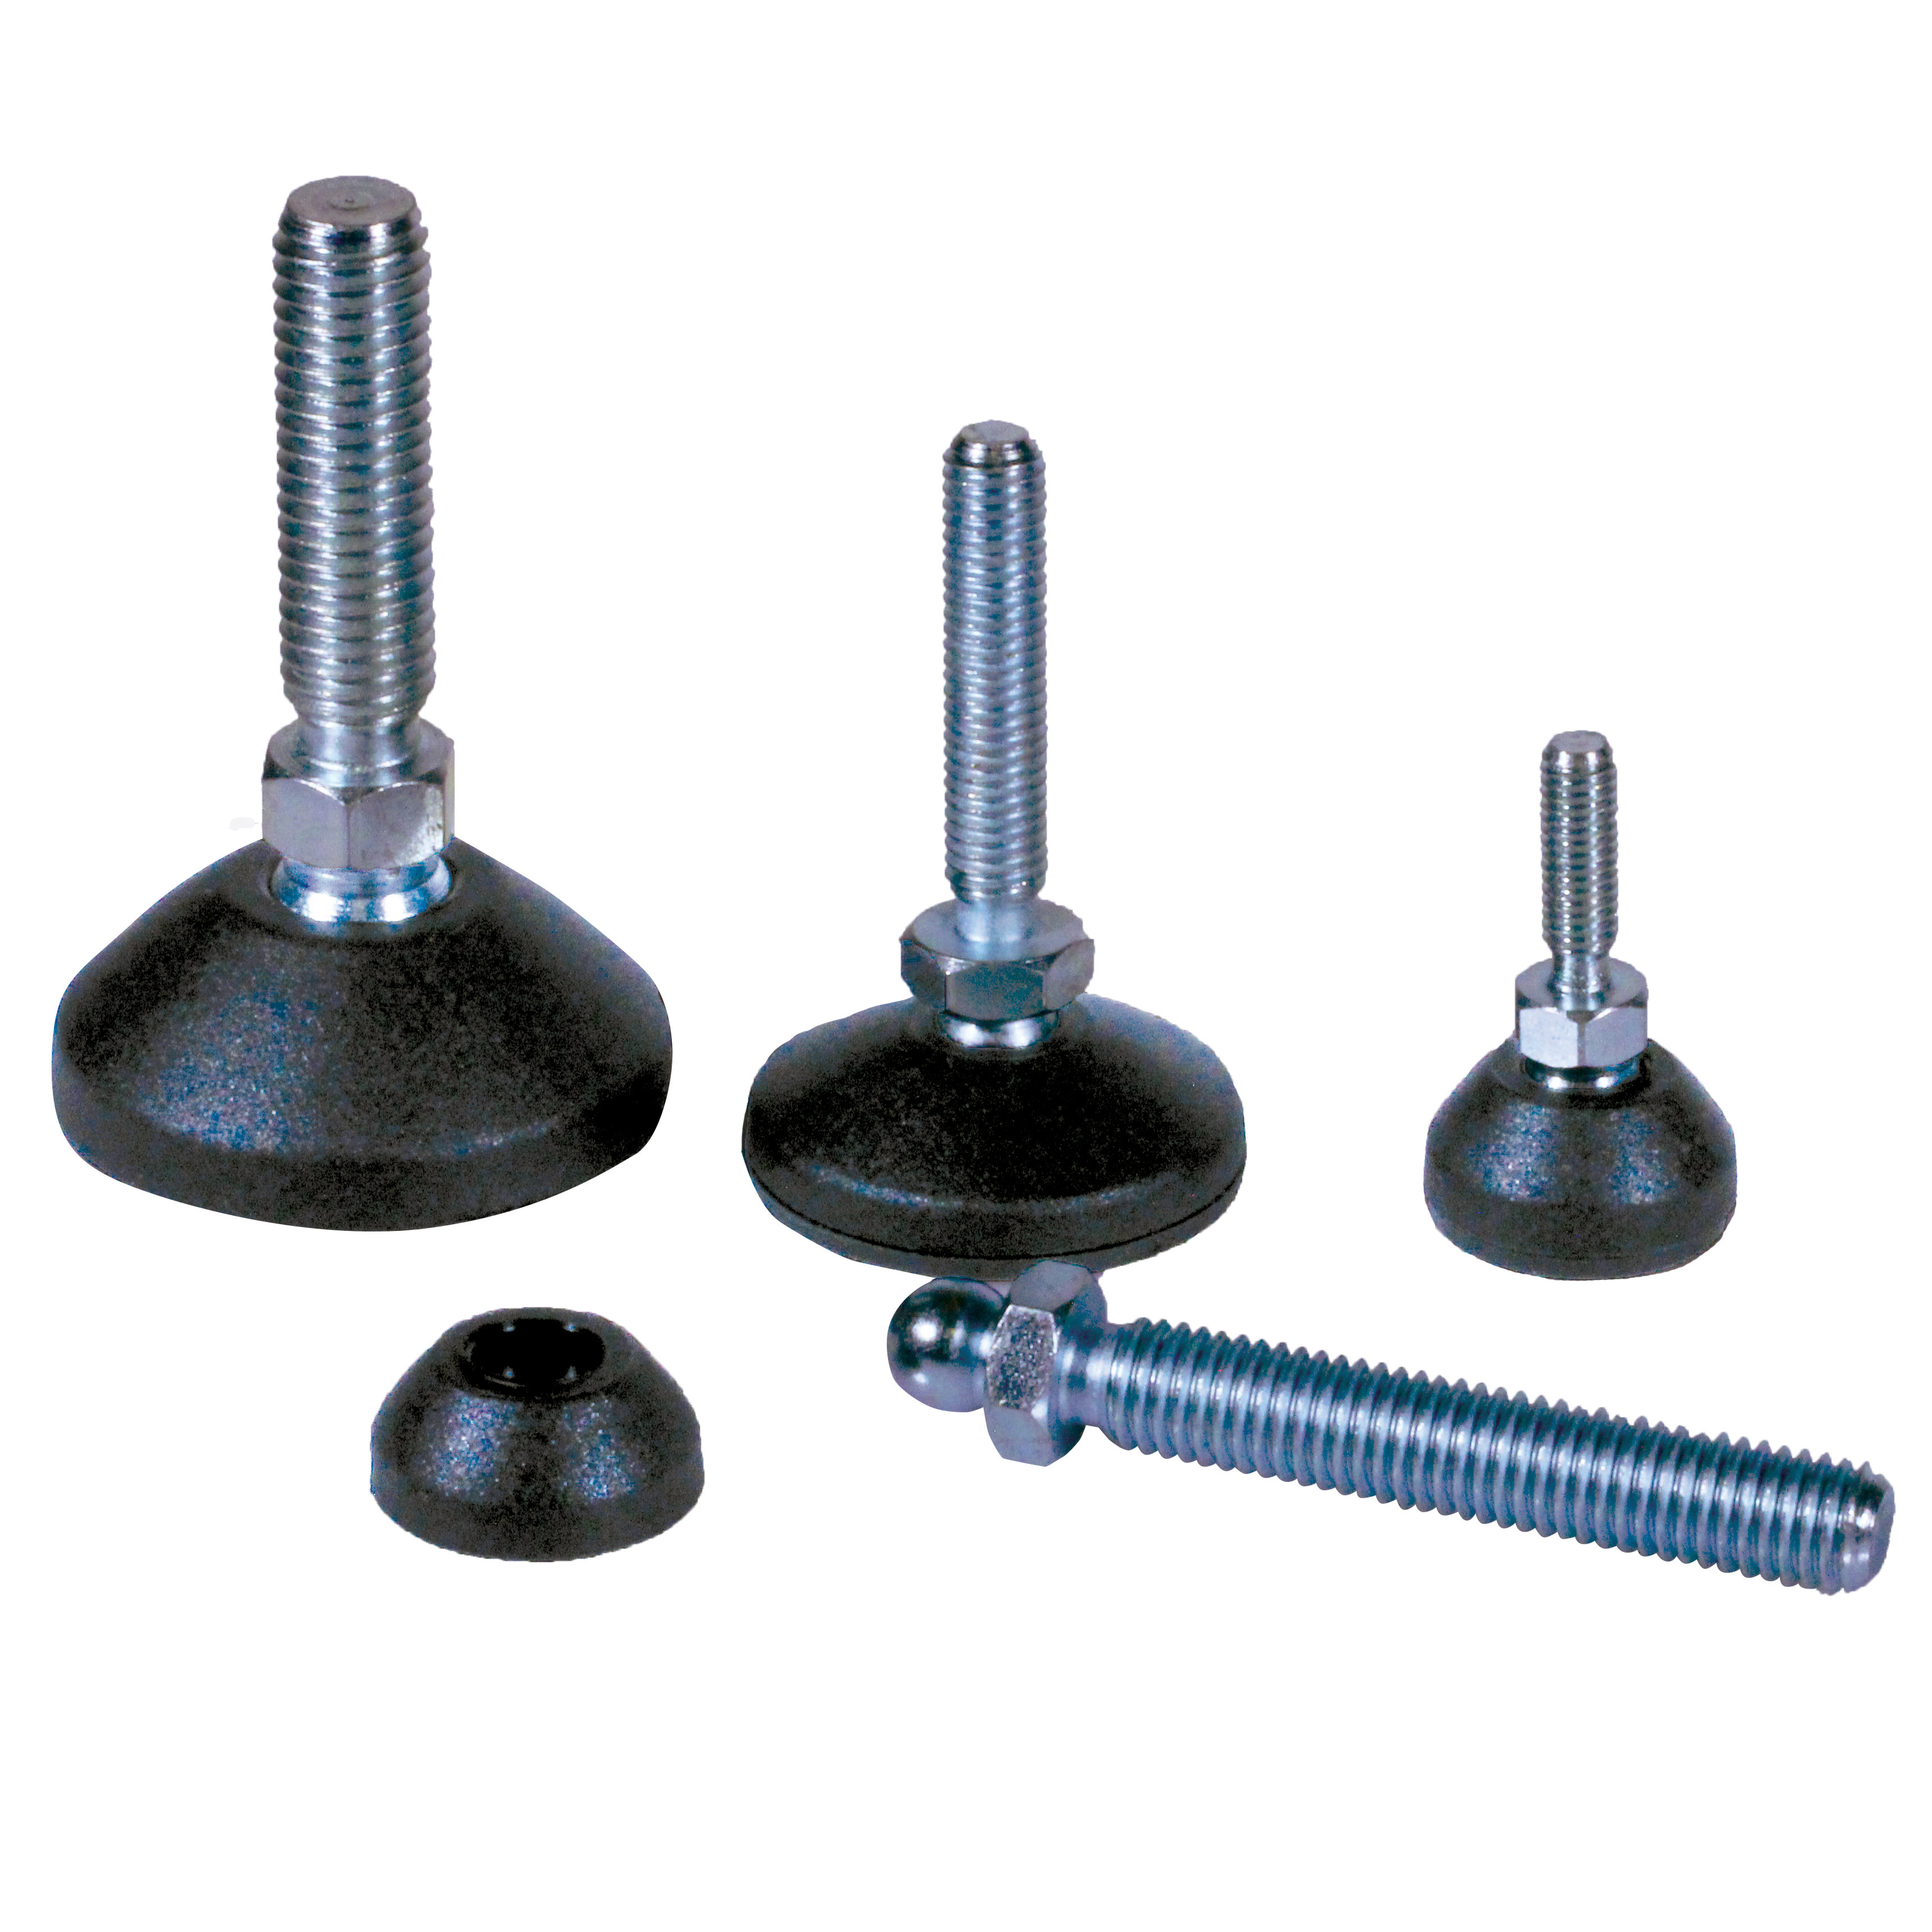 Threaded swivel feet - Swidel feet without anti-slip plate - Up to 7700N - +/-10°